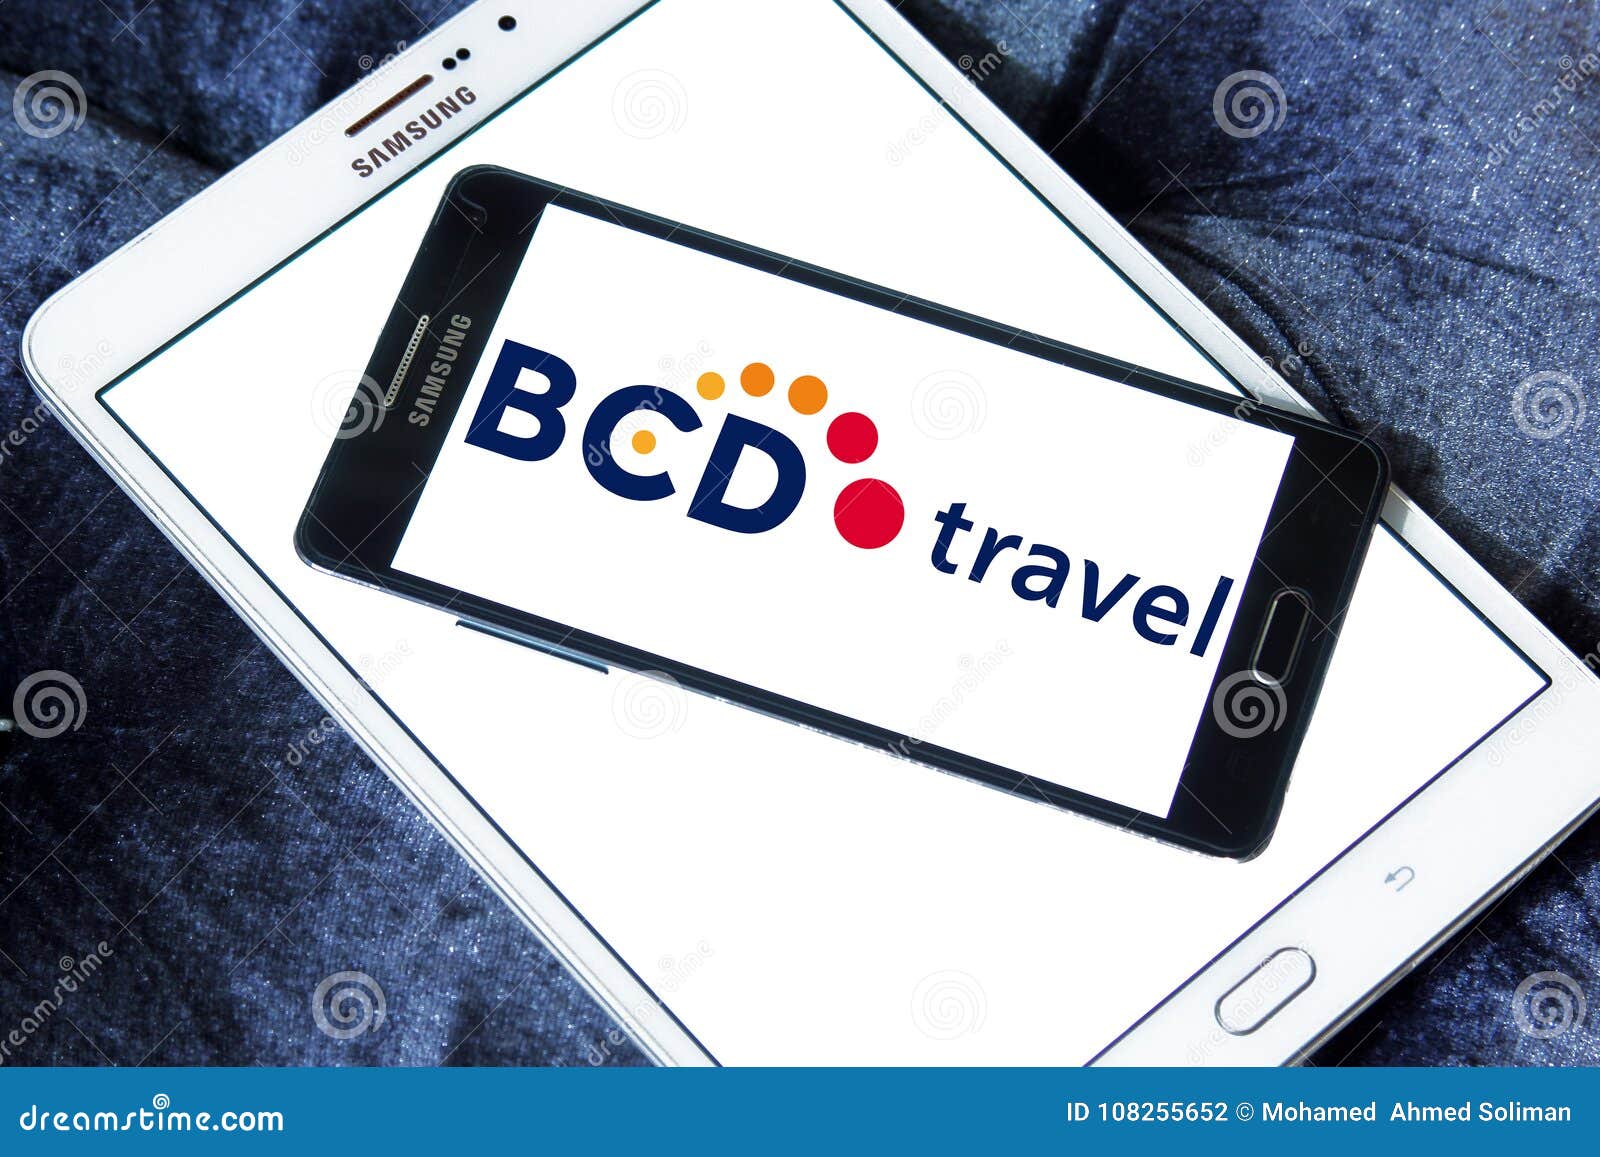 bcd travel and concur